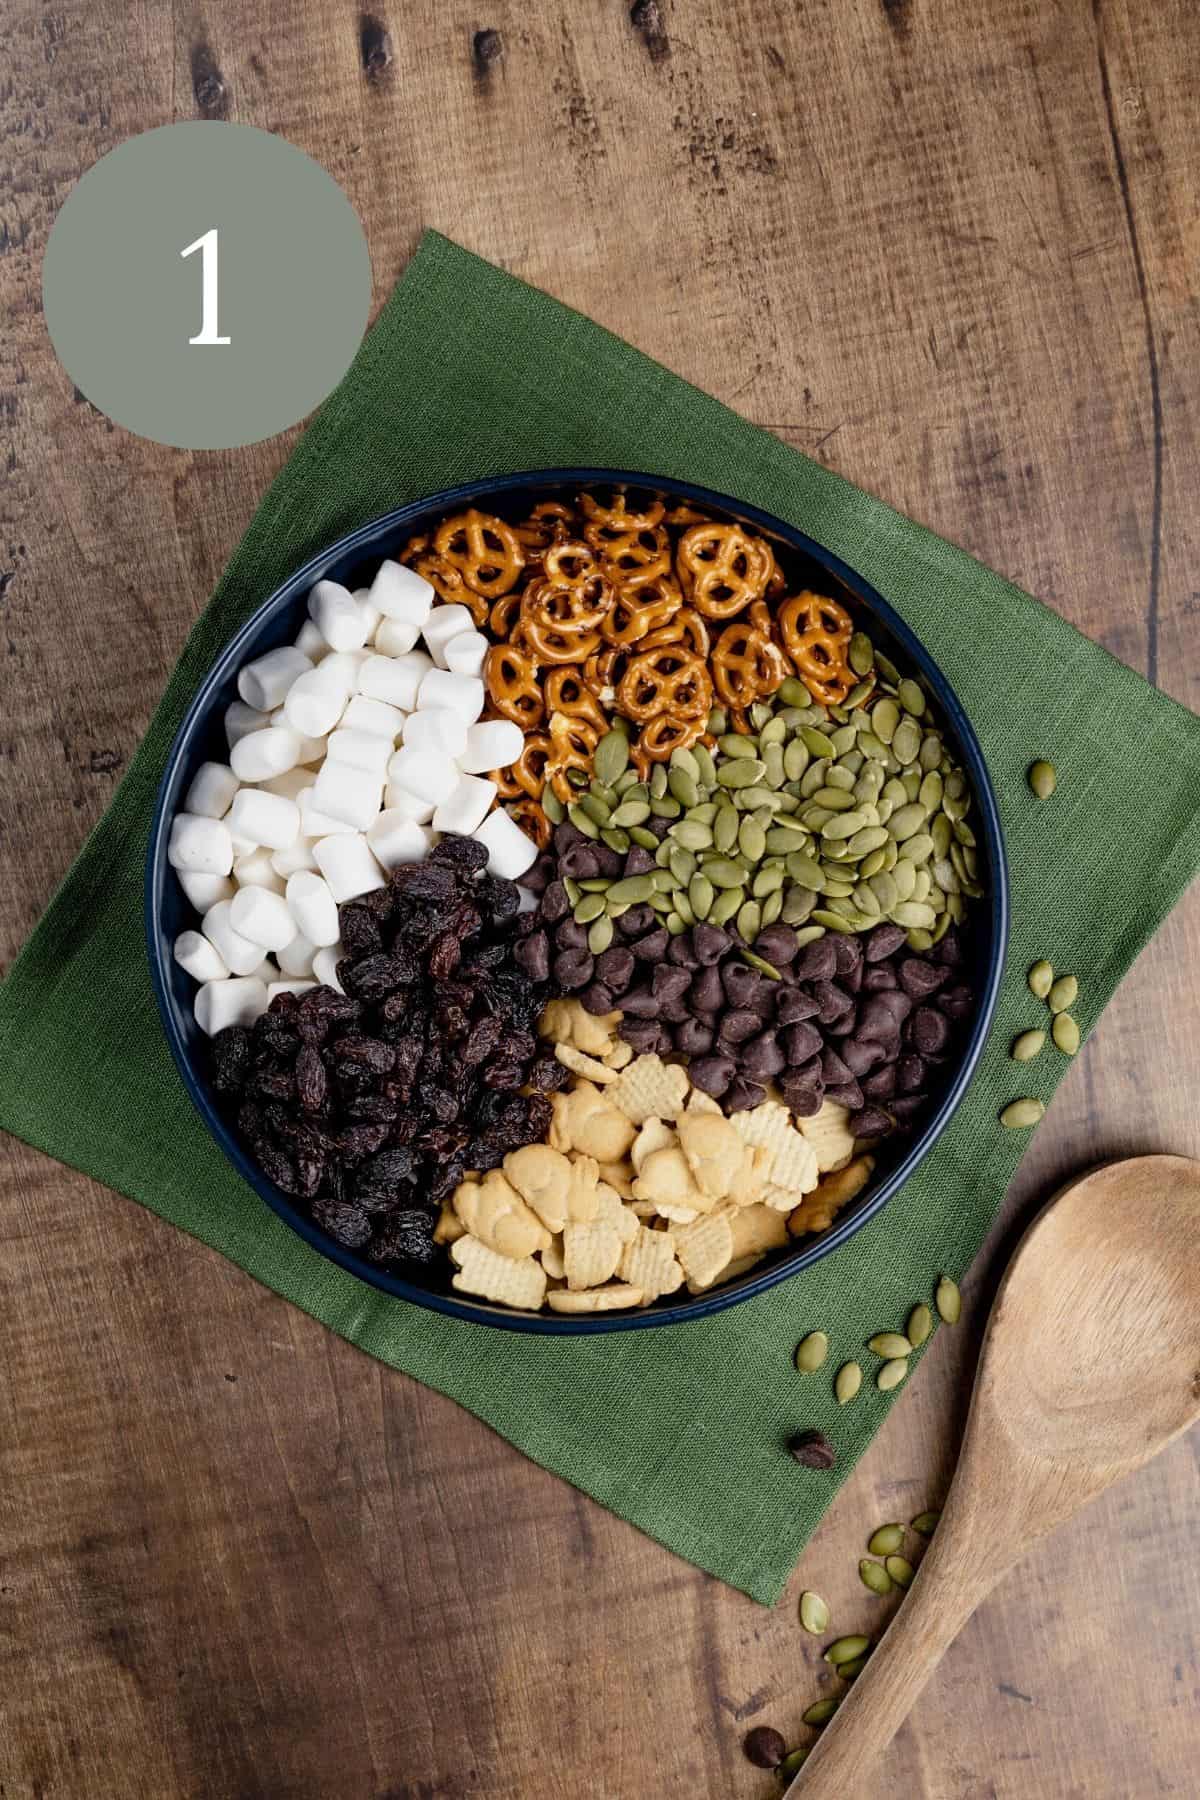 all stores trail mix ingredients in a big bowl ready to be mixed up